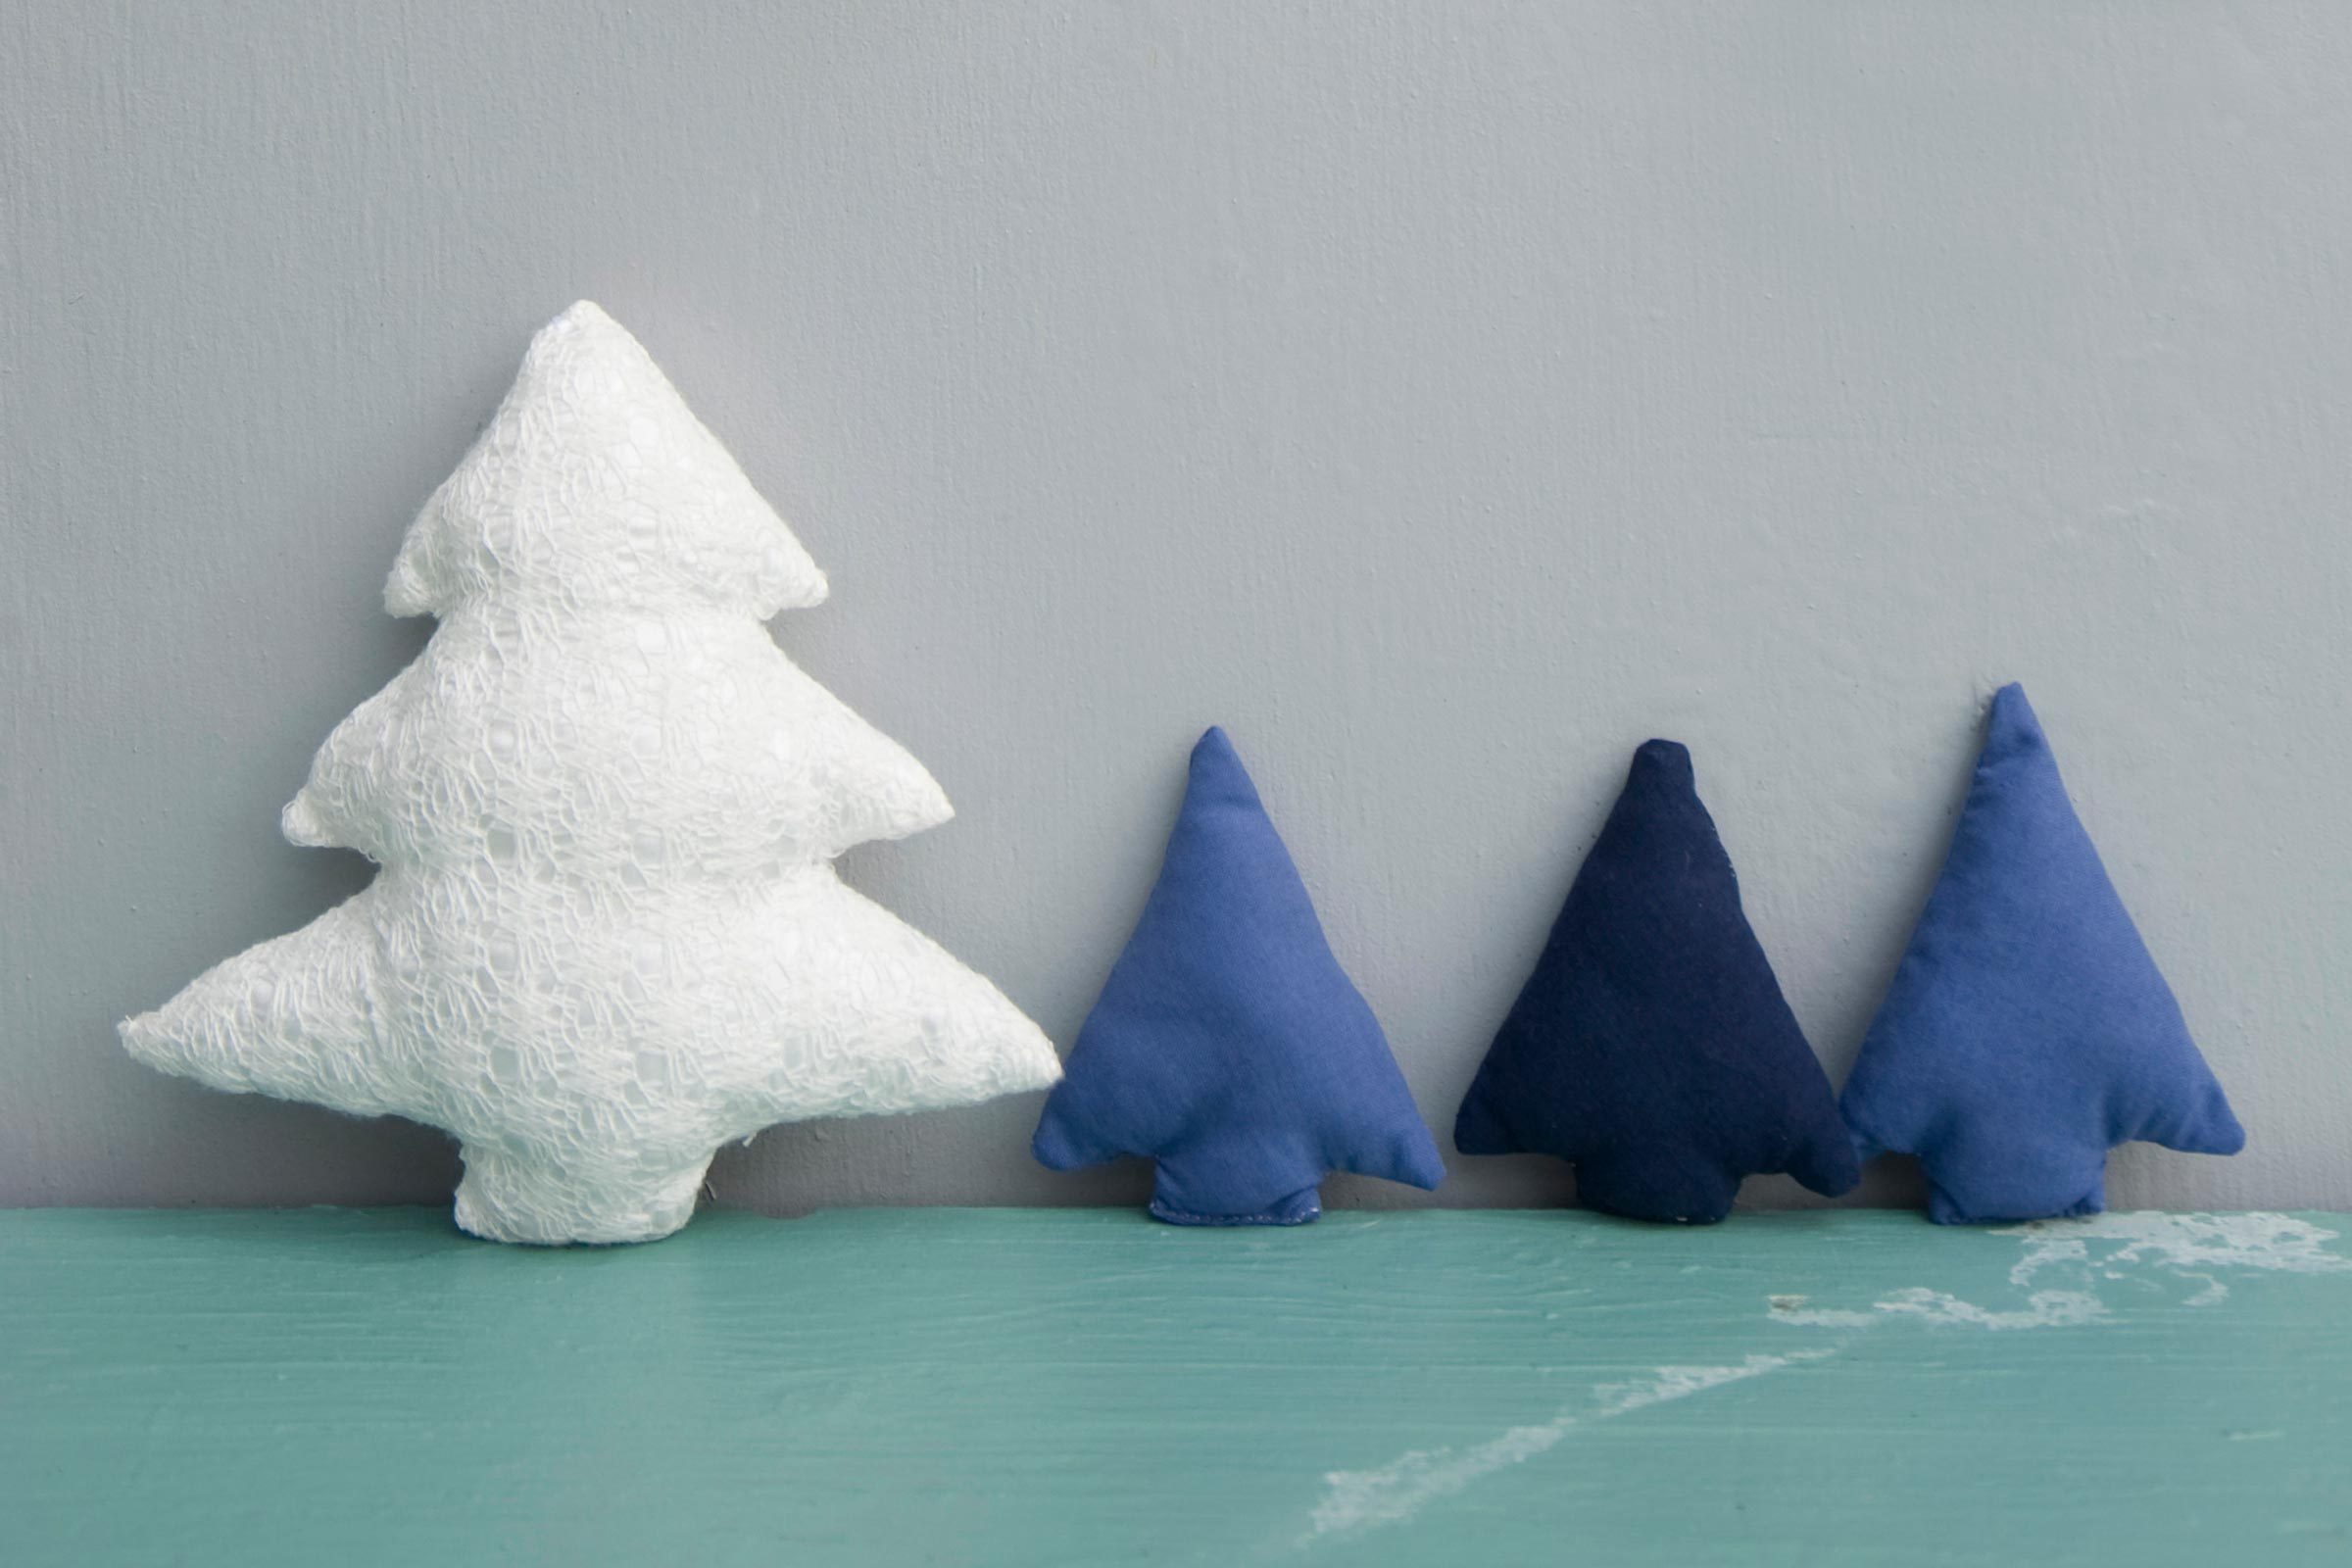 71 DIY Christmas Decorations That’ll Make Your Home Festive